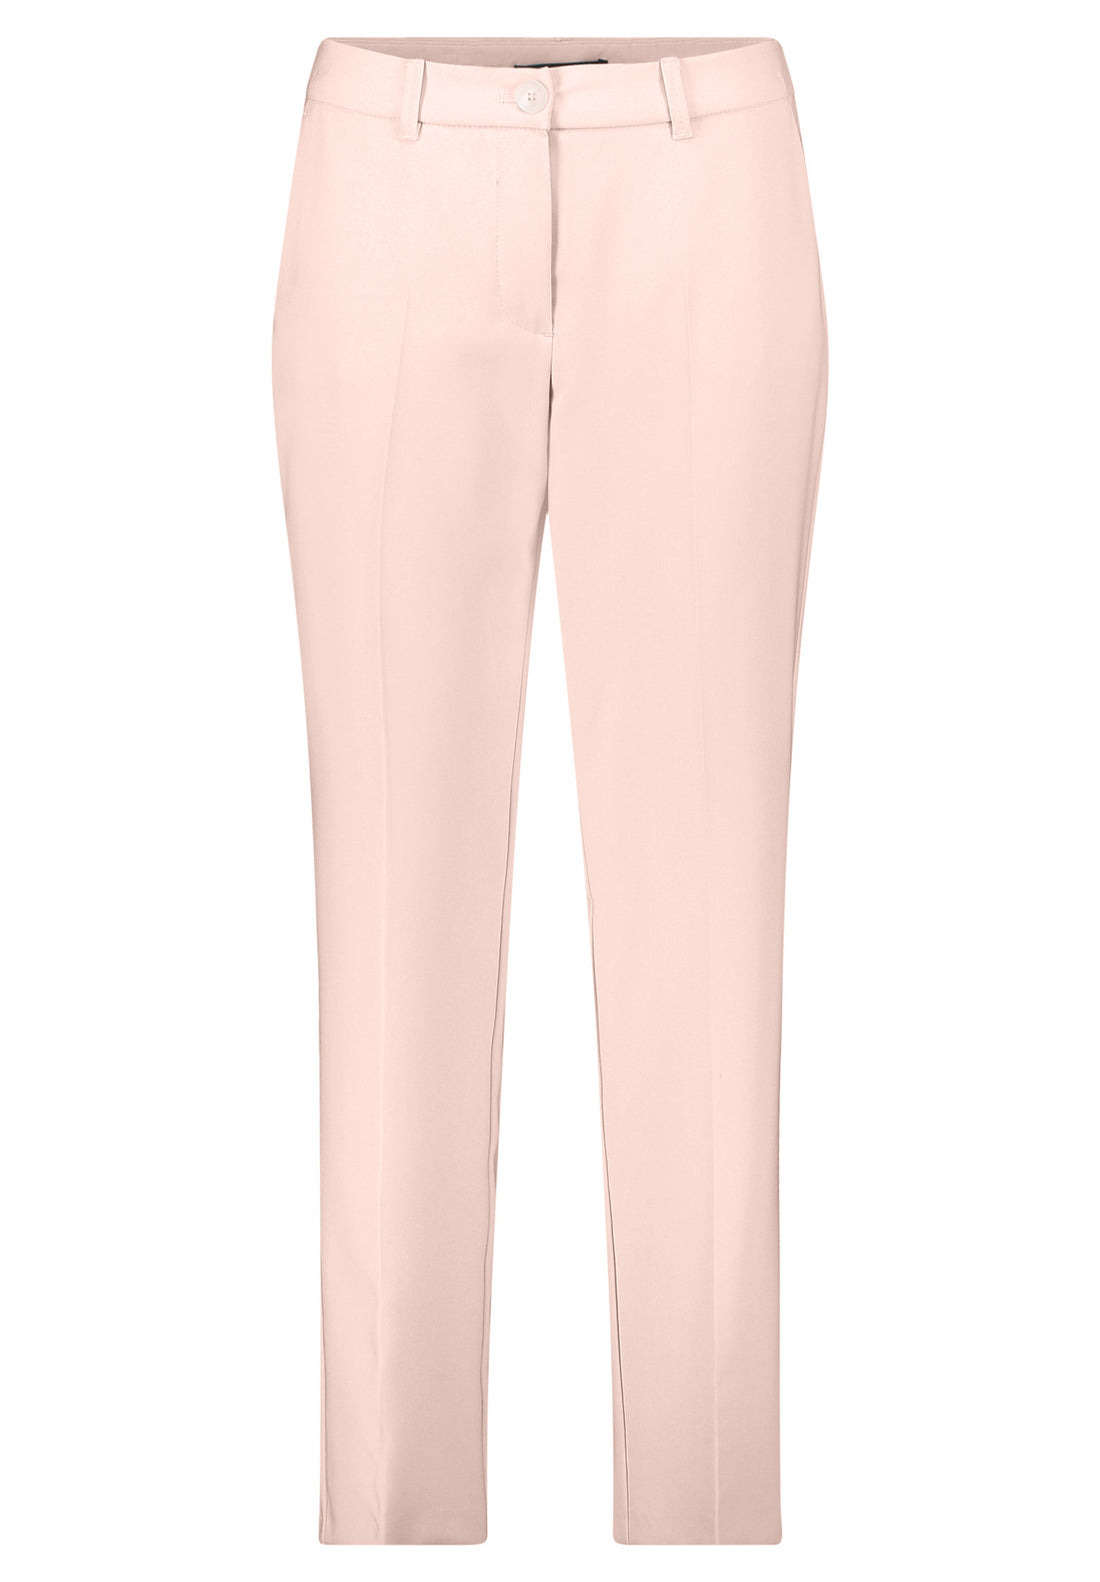 Business Trousers
With Crease_6002-1080_6055_02